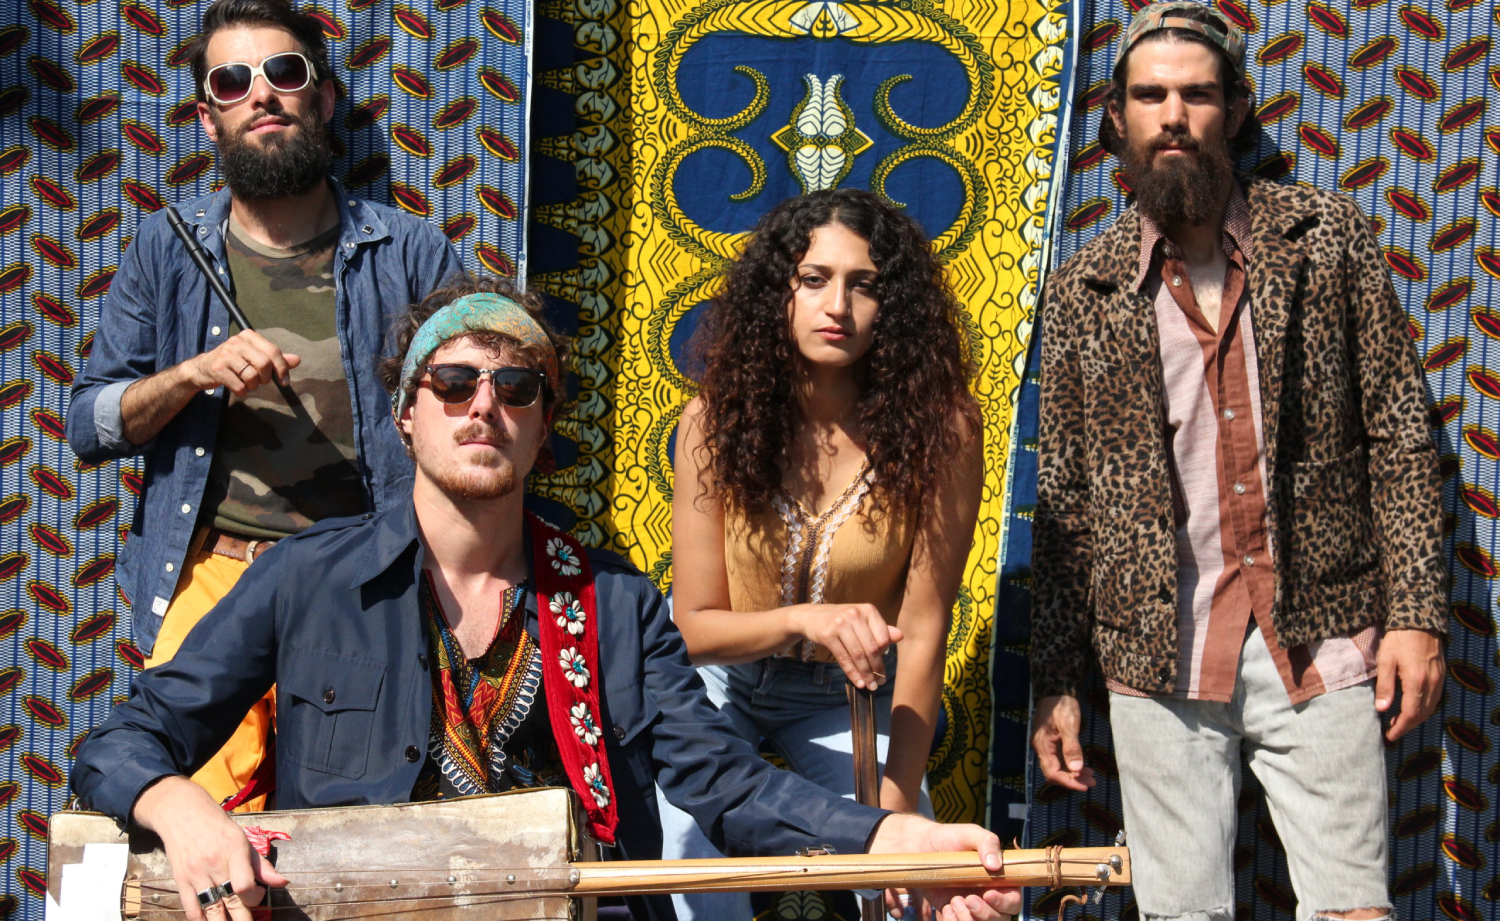 Nayda! Gnawa Music Get the Psychedelic Rock Treatment in Remarkable First Album From Bab L'Bluz